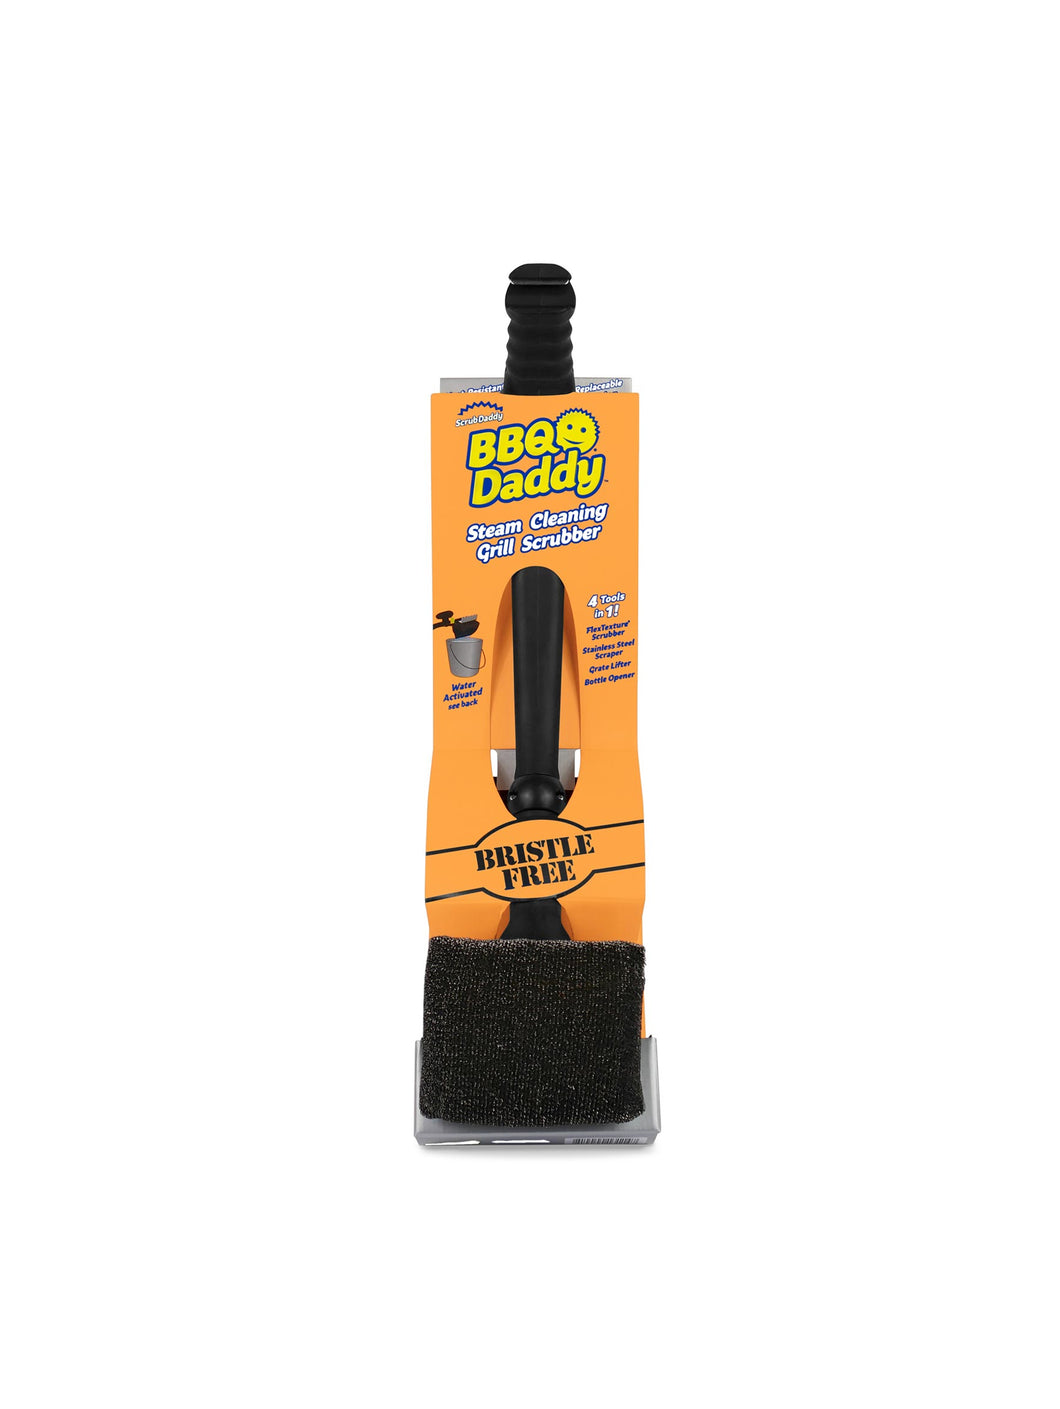 Scrub Daddy BBQ Daddy Grill Brush - Bristle Free Grill Brush with Stainless Steel Scraper